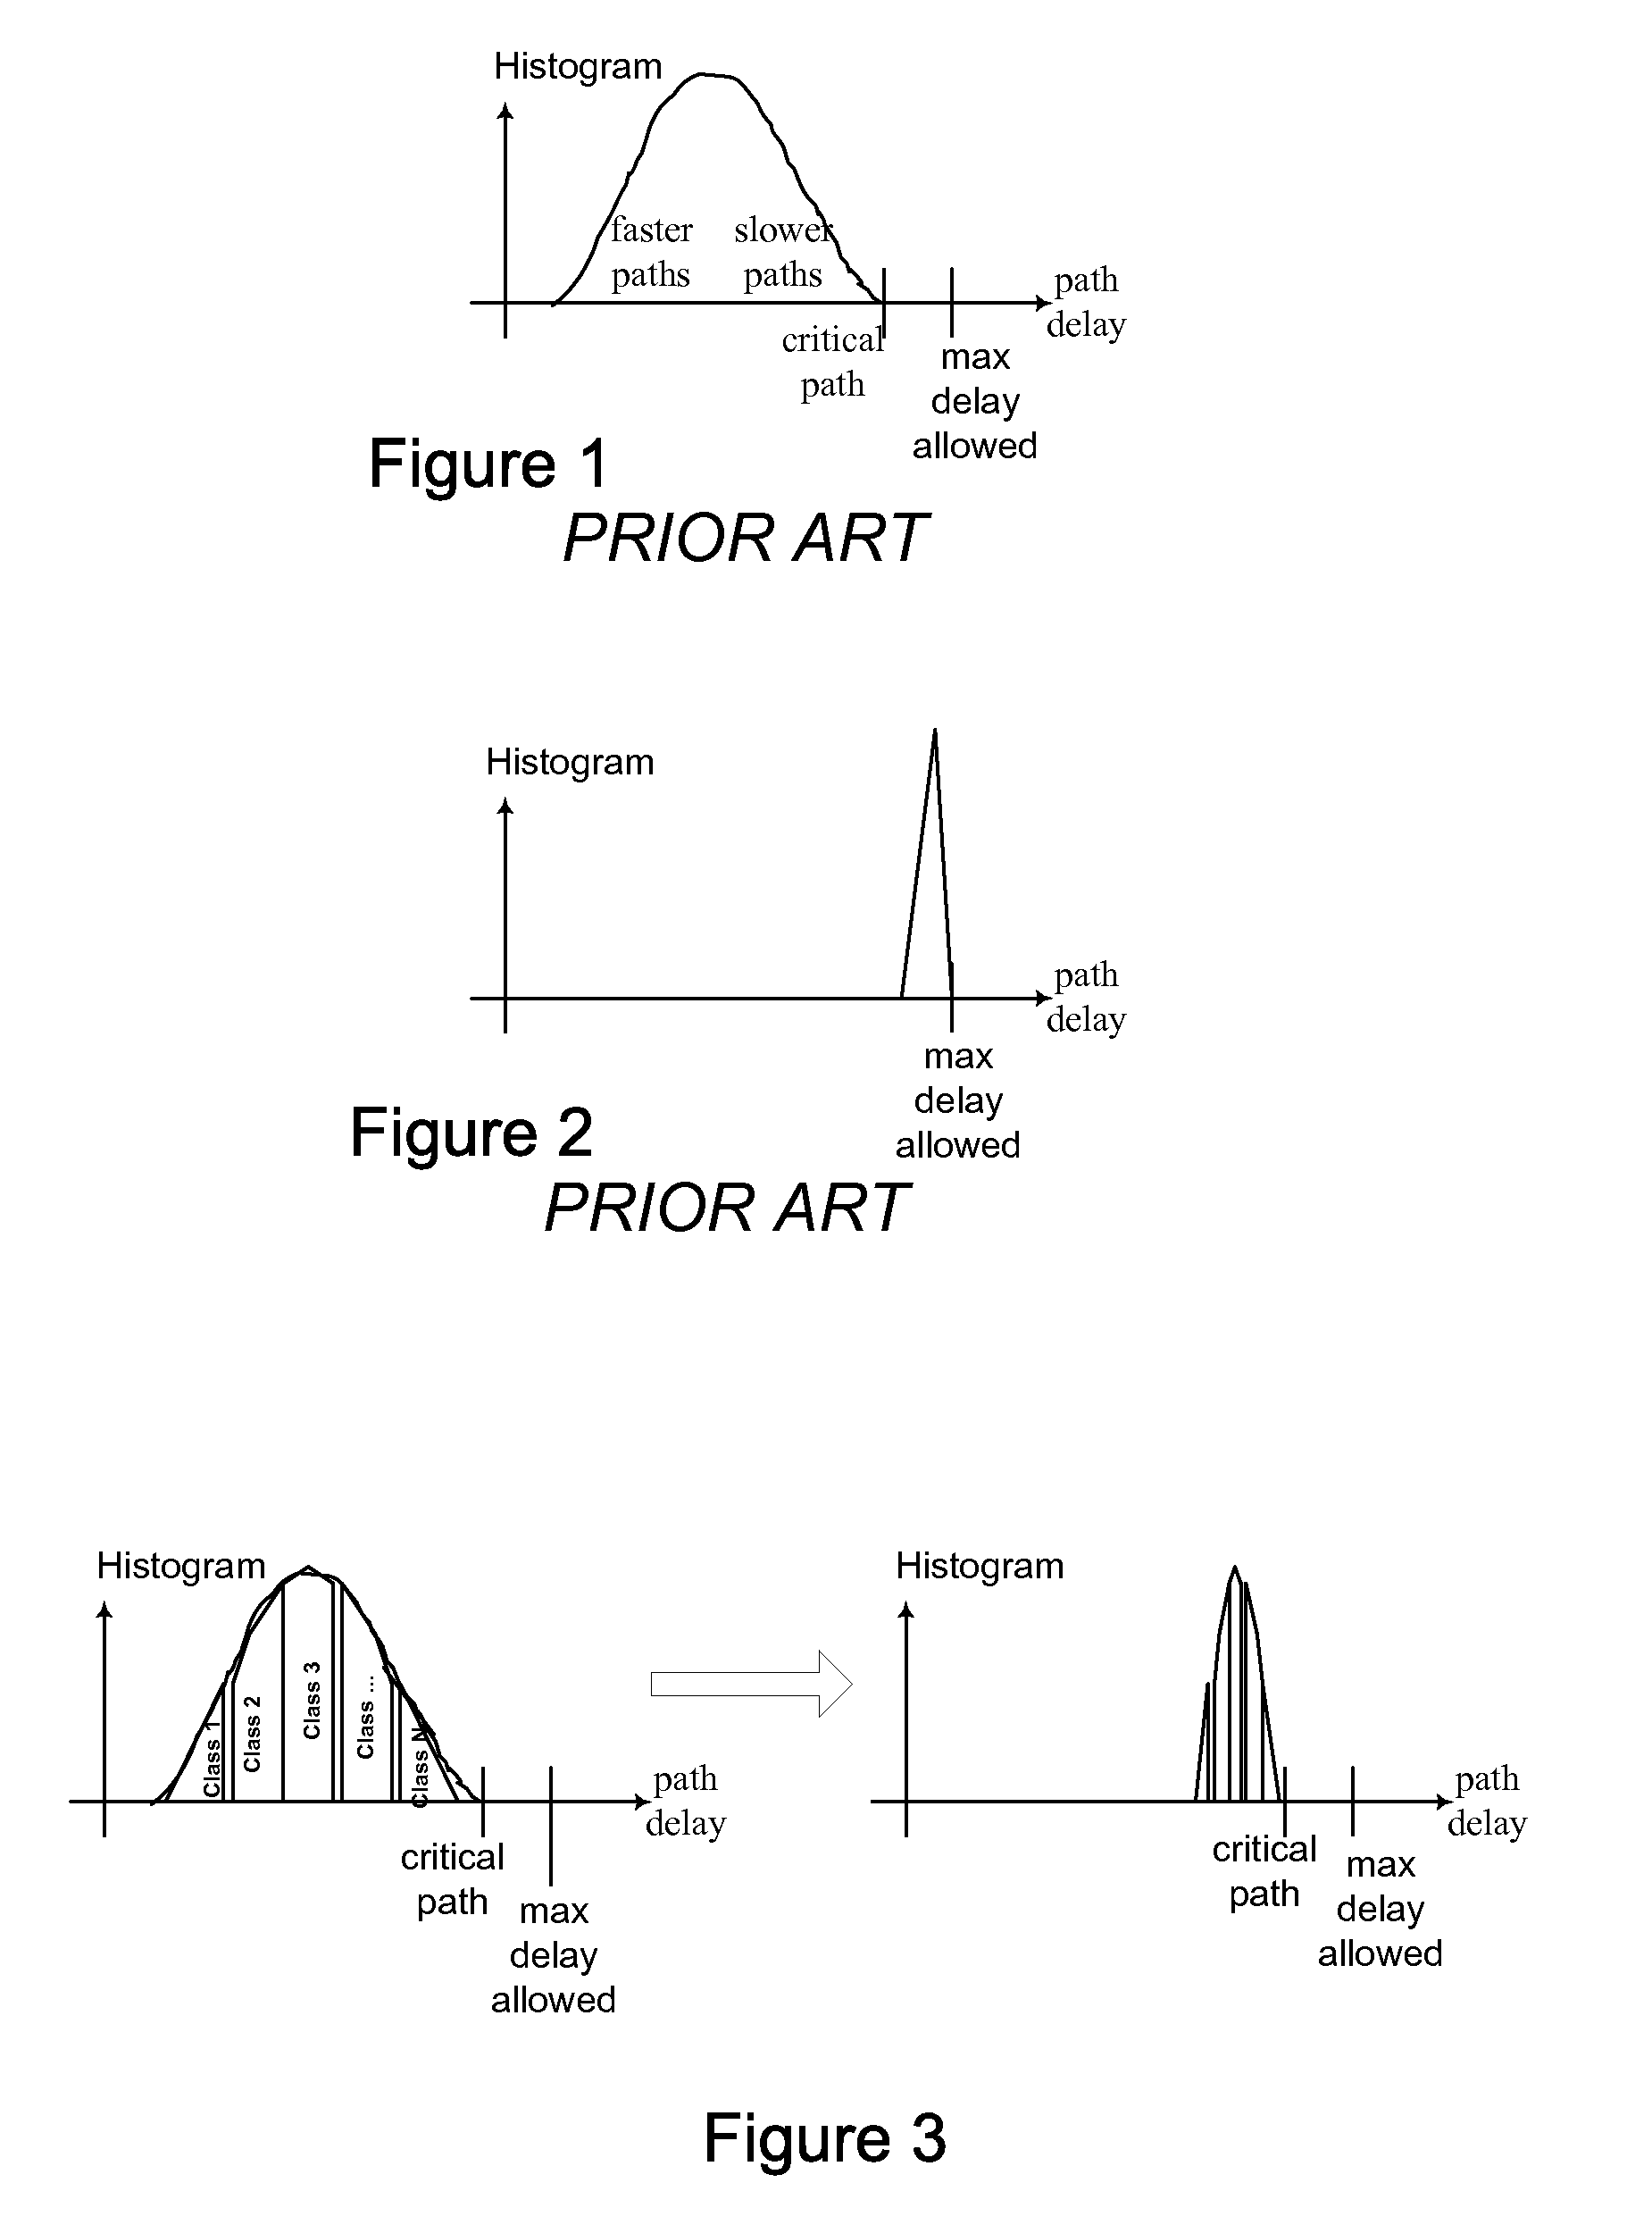 Systems and methods of reducing power consumption of digital integrated circuits